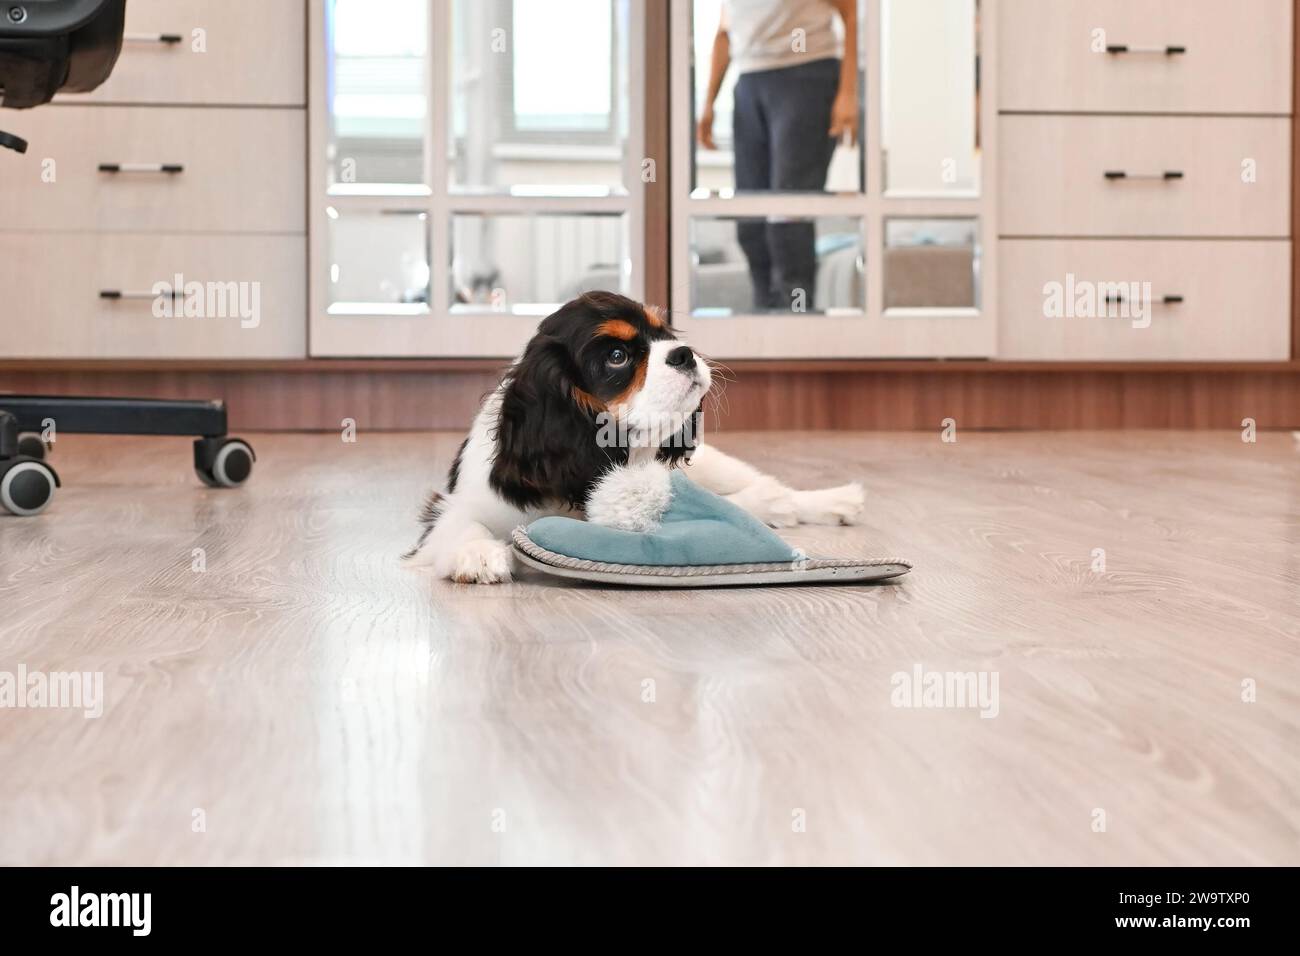 The owner is teaching a small Cavalier King Charles Spaniel puppy to behave at home. The adorable little dog is chewing on shoes as part of the obedie Stock Photo